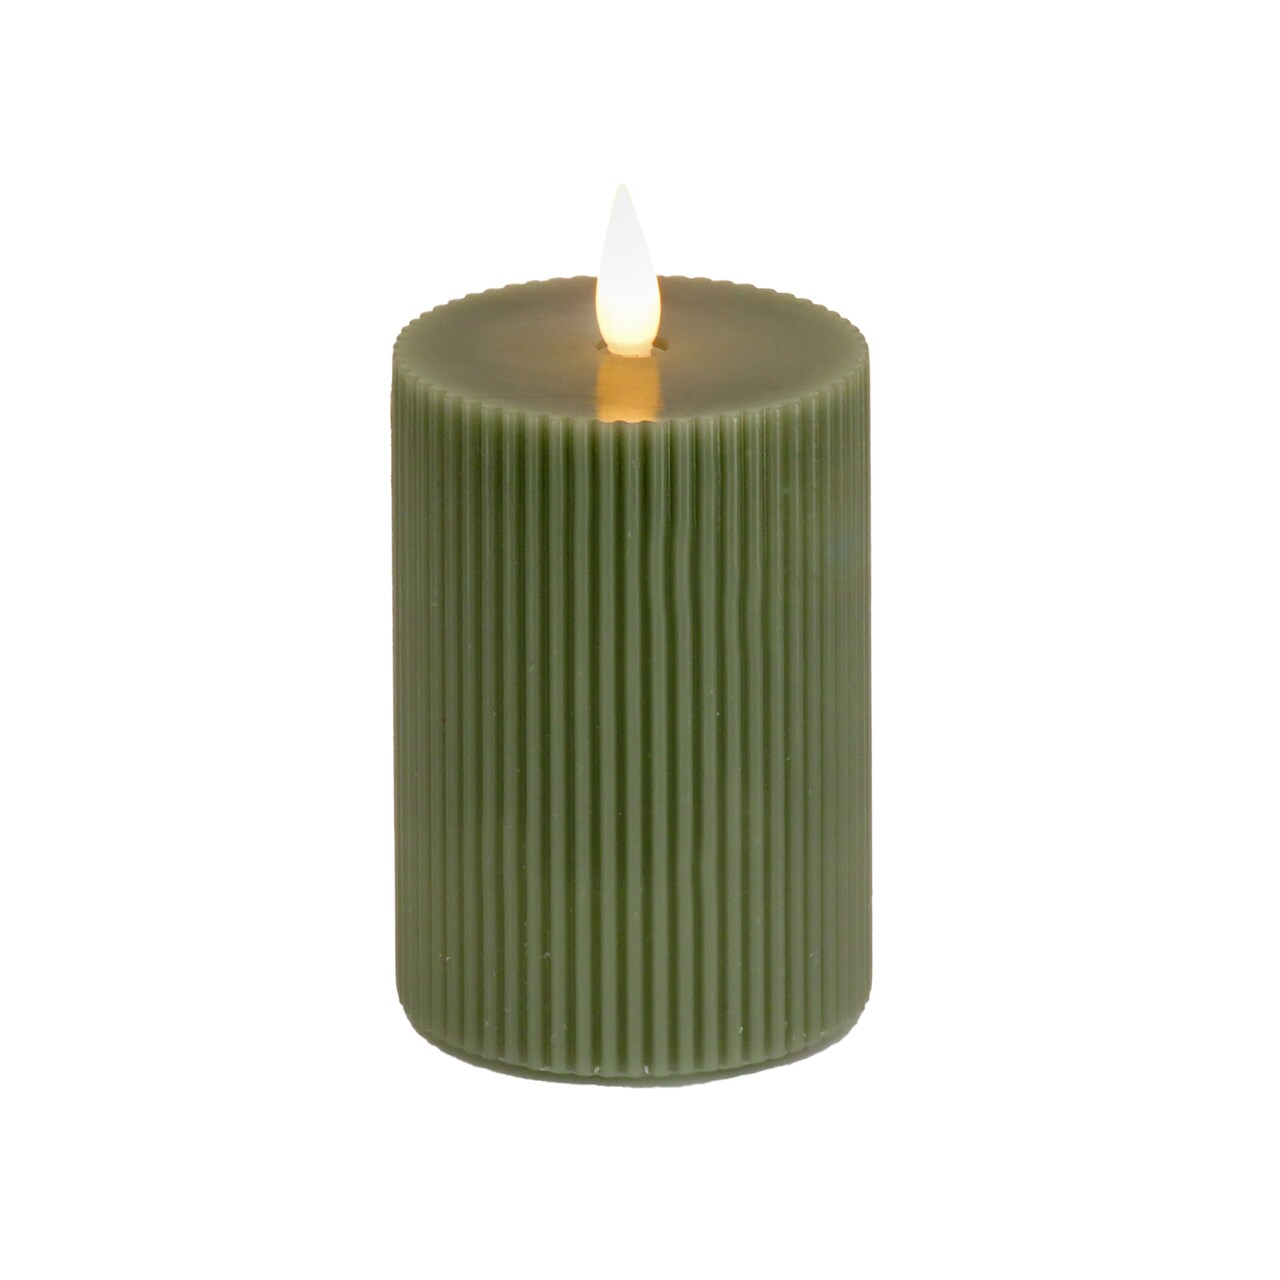 HGTV Home Collection Georgetown Real Motion Flameless Candle With Remote, Green with Warm White LED Lights, Battery Powered, 8 in